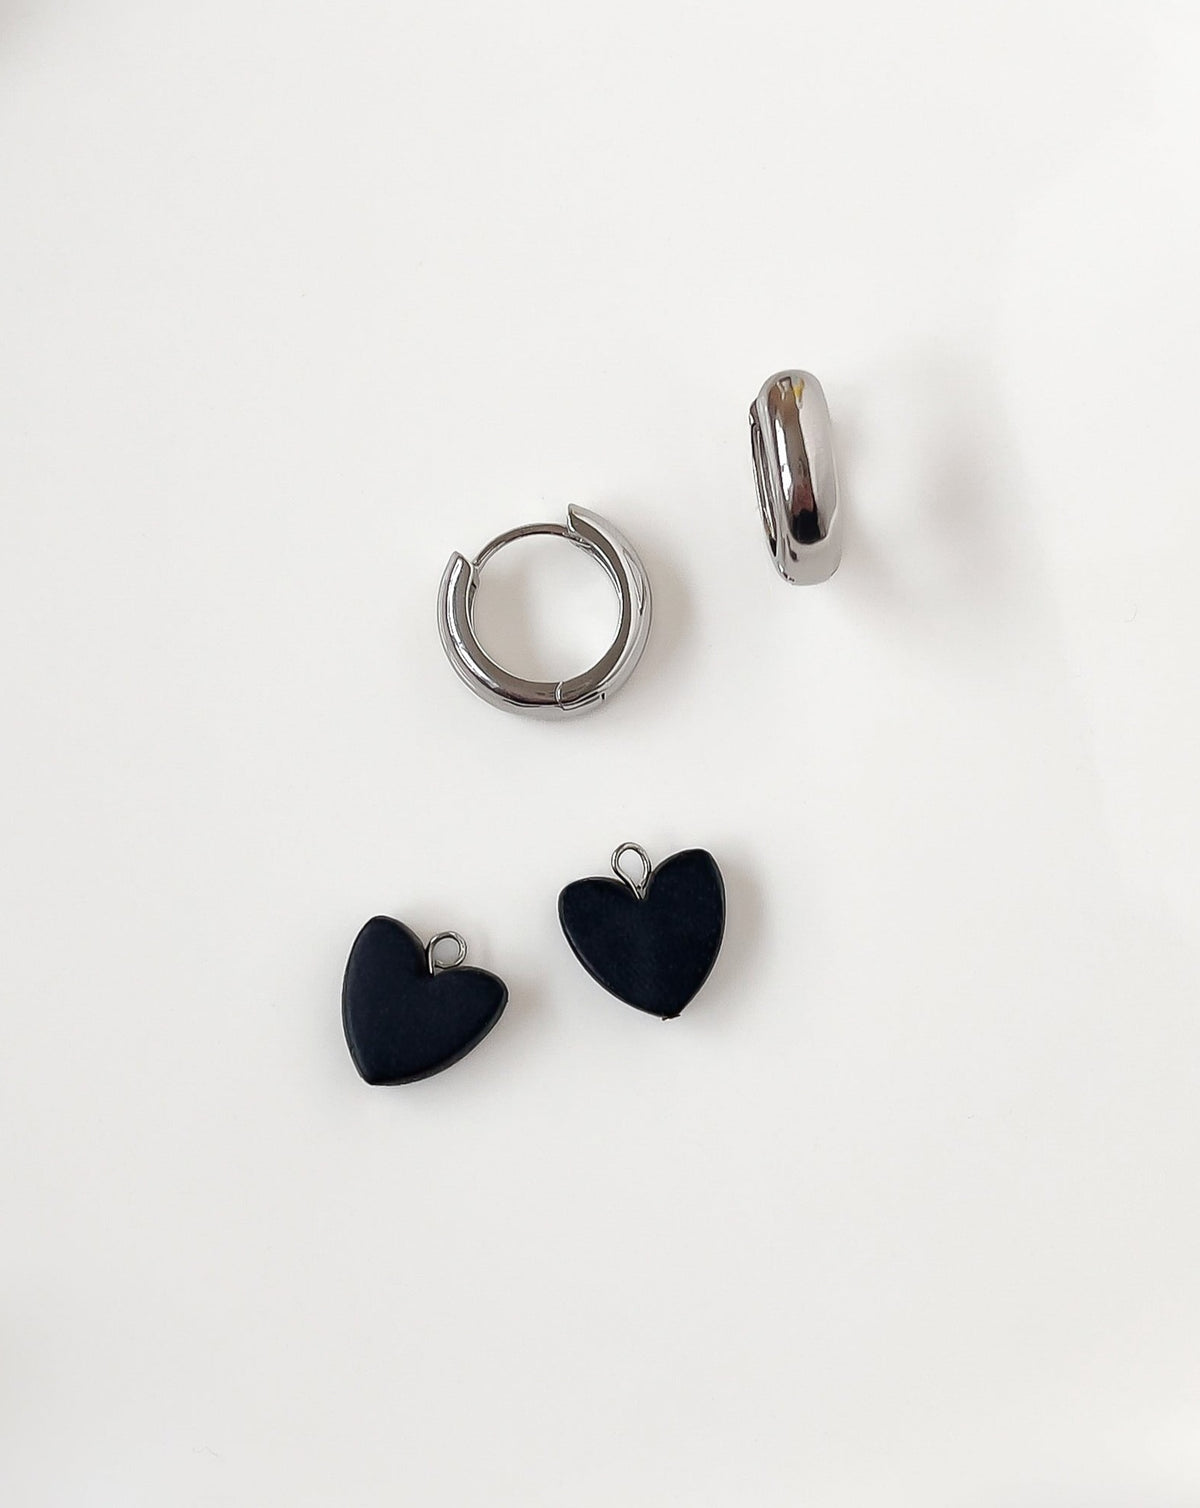 Close up of Charming Heart earrings with Bold silver Hoops and black Heart charm.